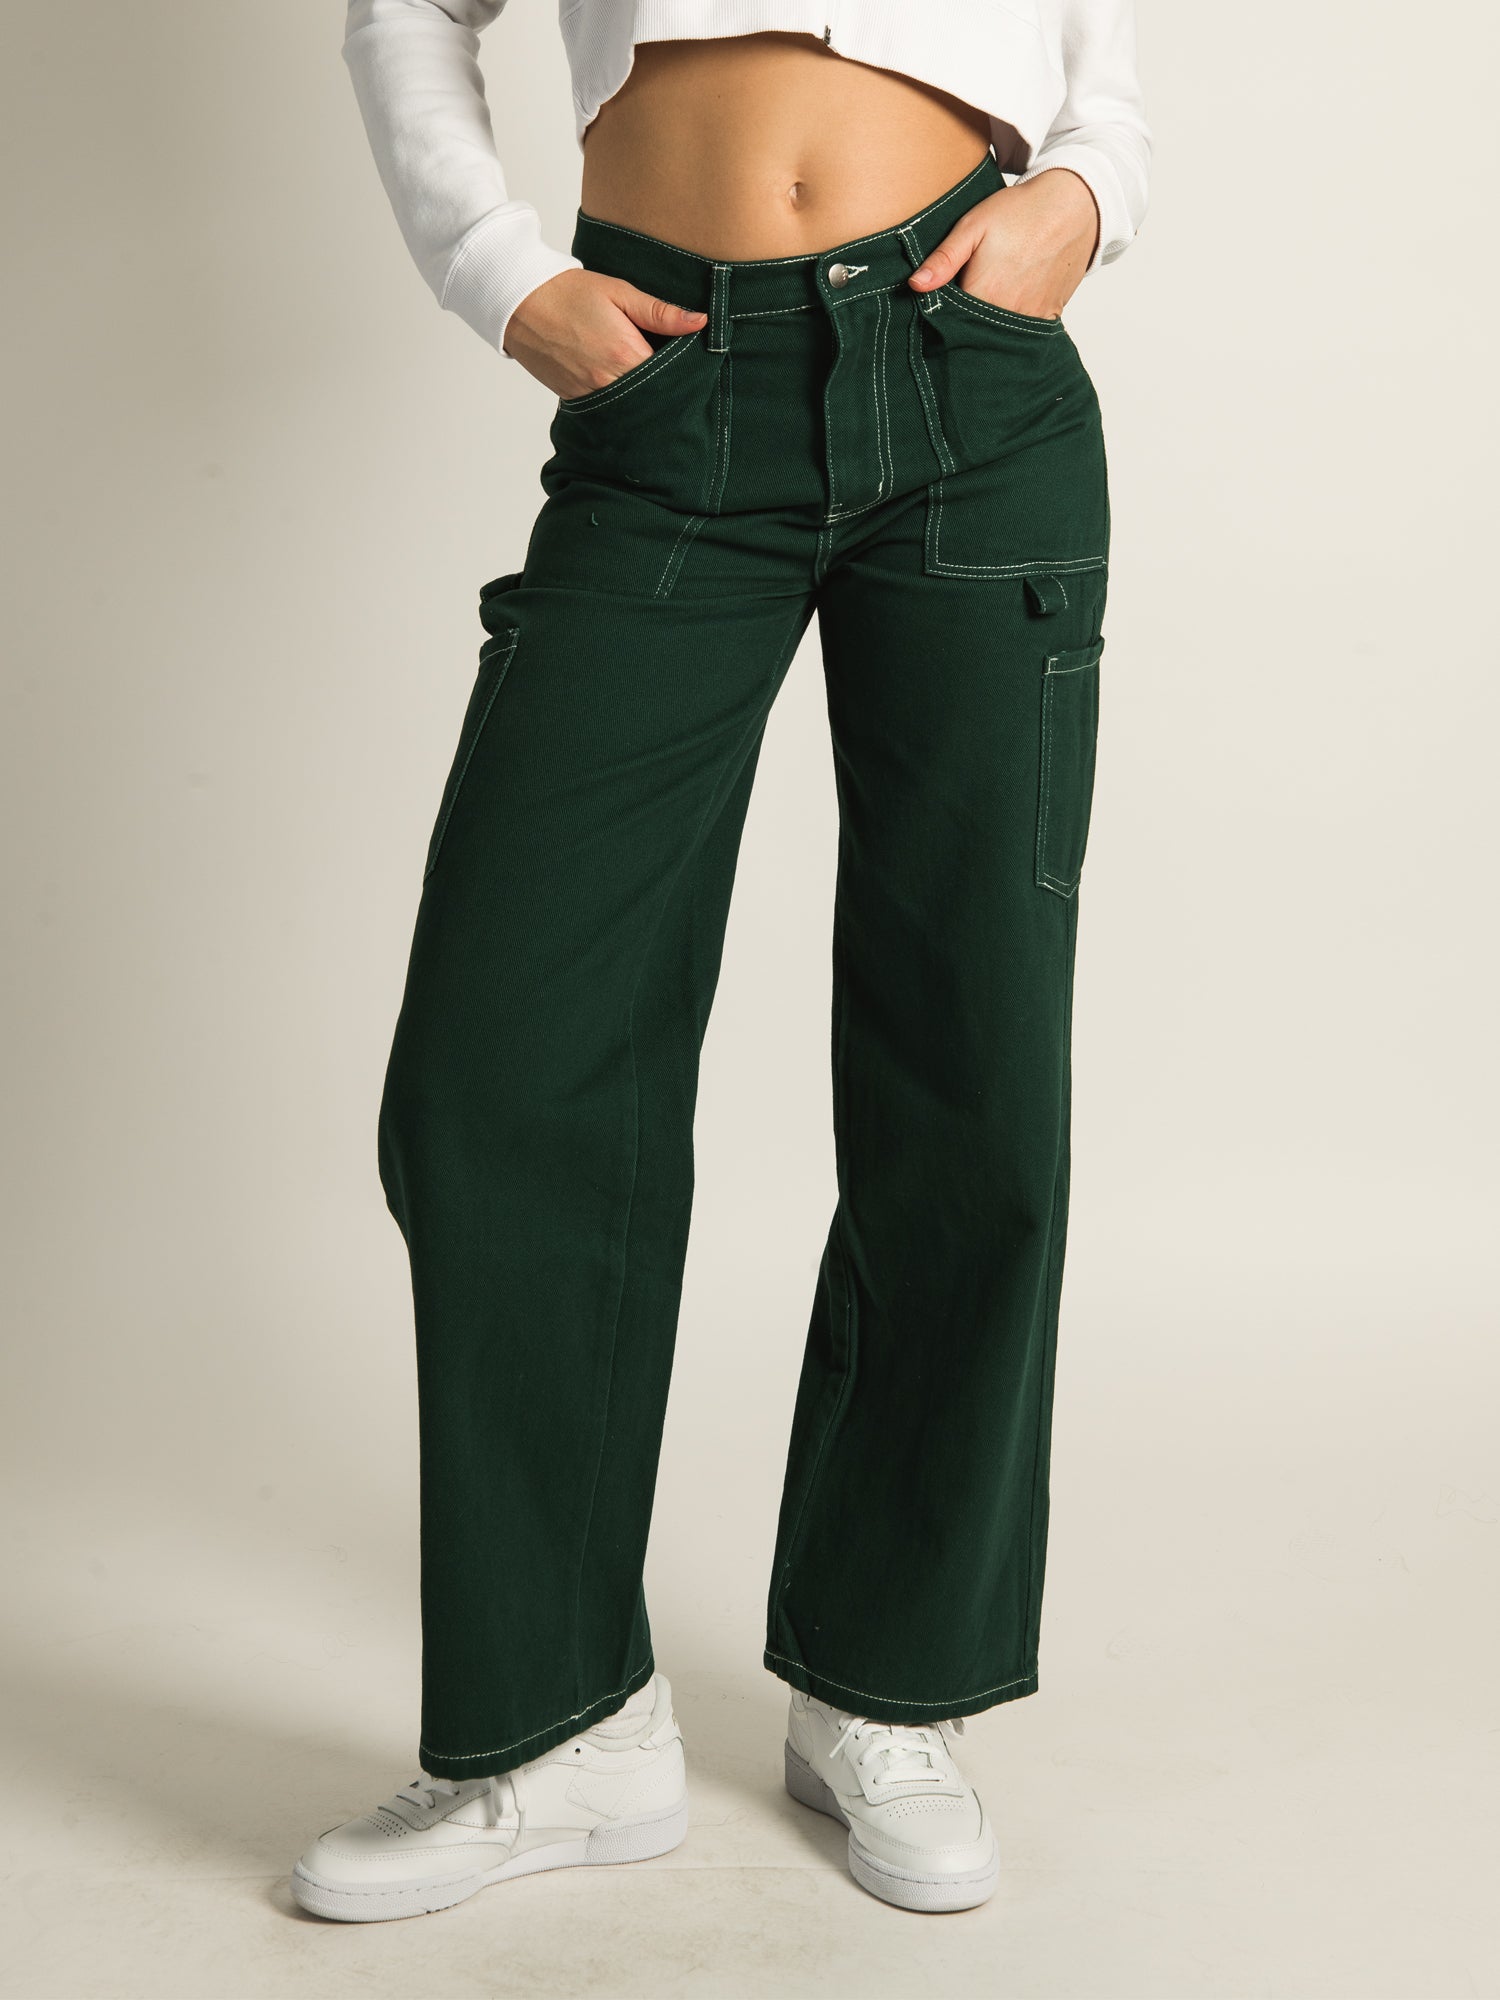 HARLOW HIGH RISE UTILITY PANT - CLEARANCE